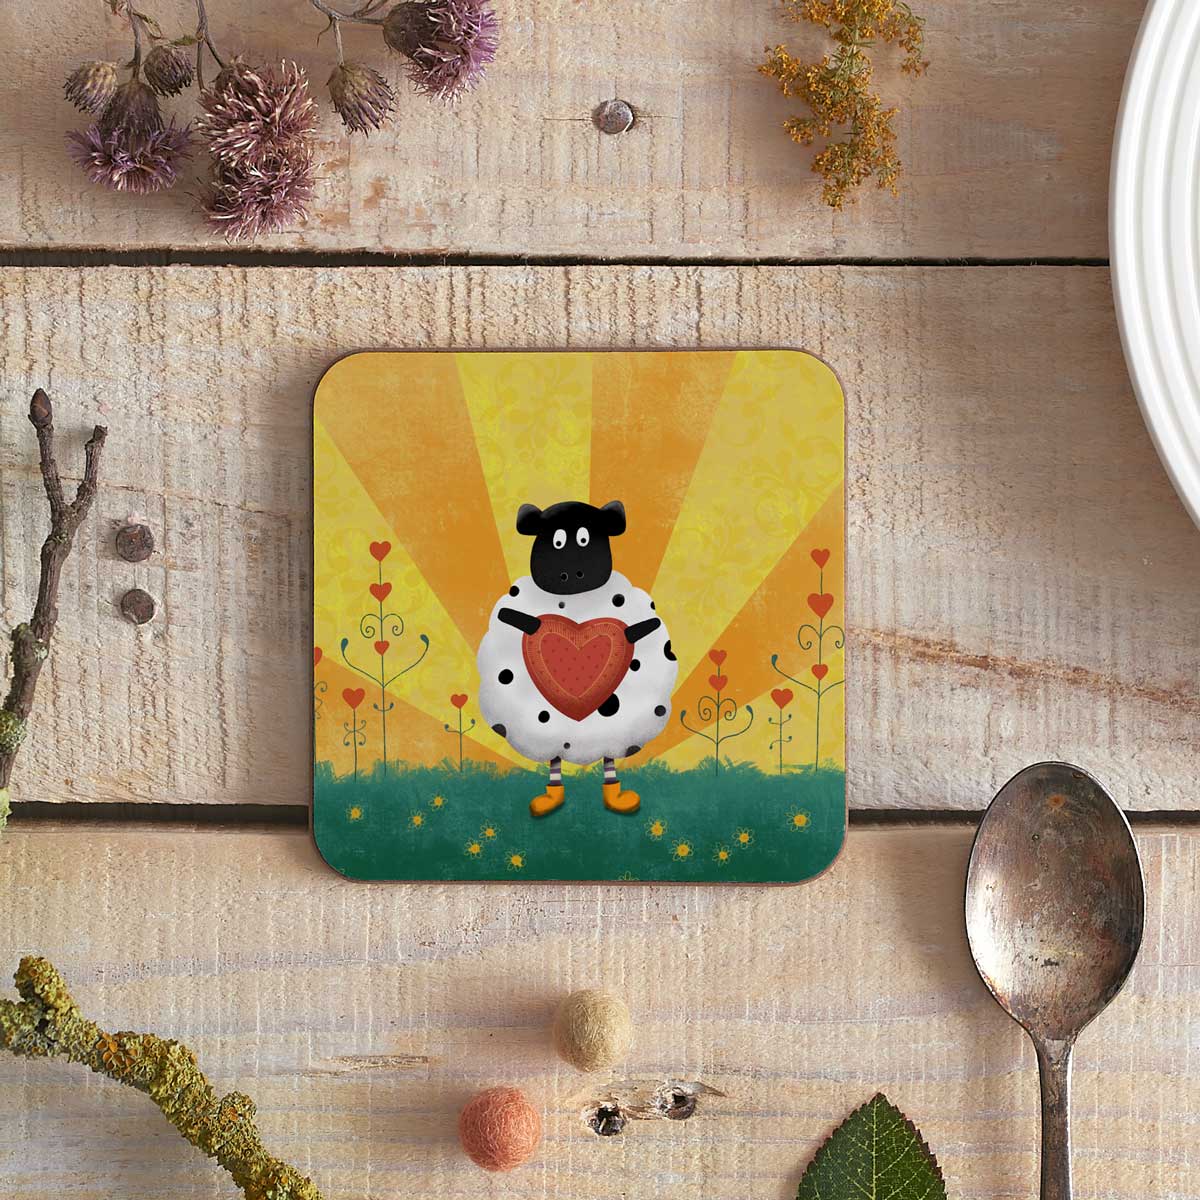 square coaster with image of a sheep holding a heart